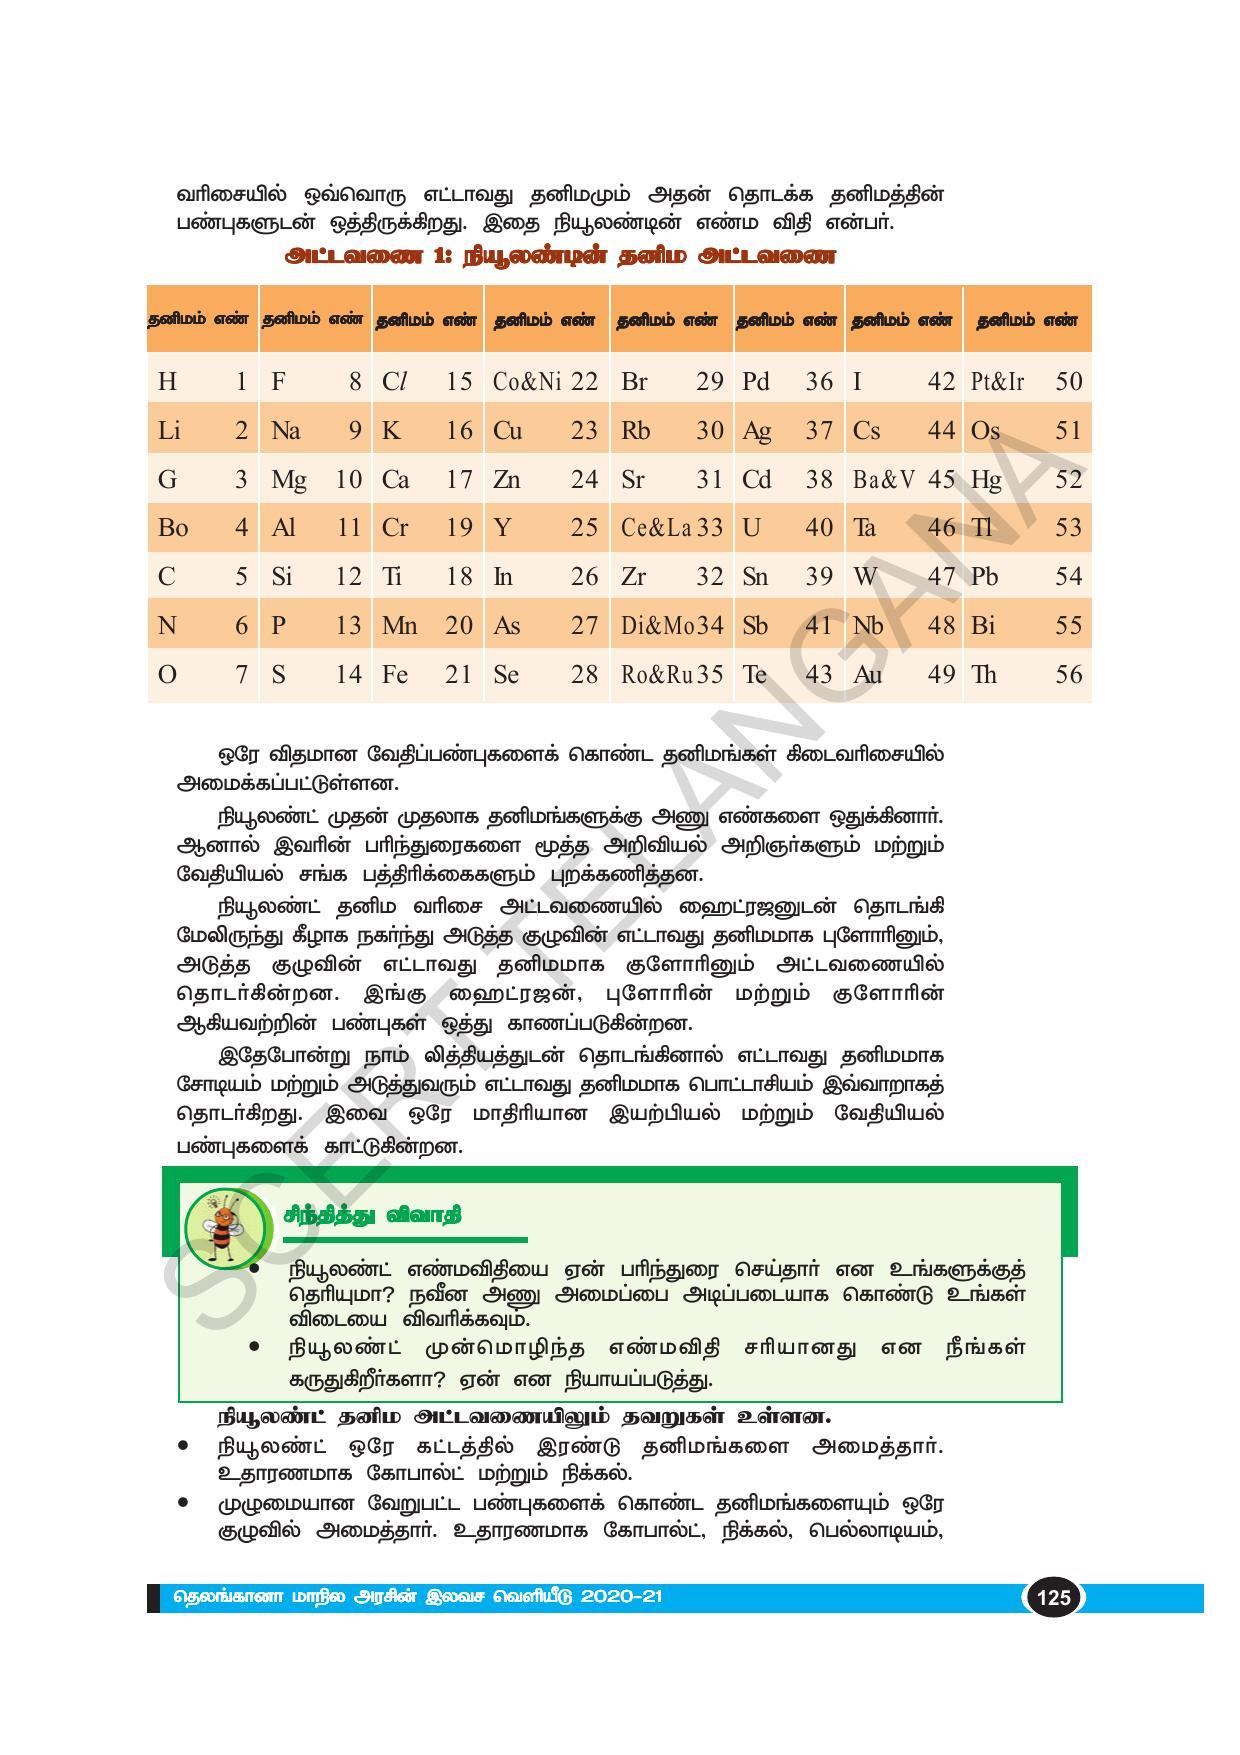 TS SCERT Class 10 Physical Science(Tamil Medium) Text Book - Page 137